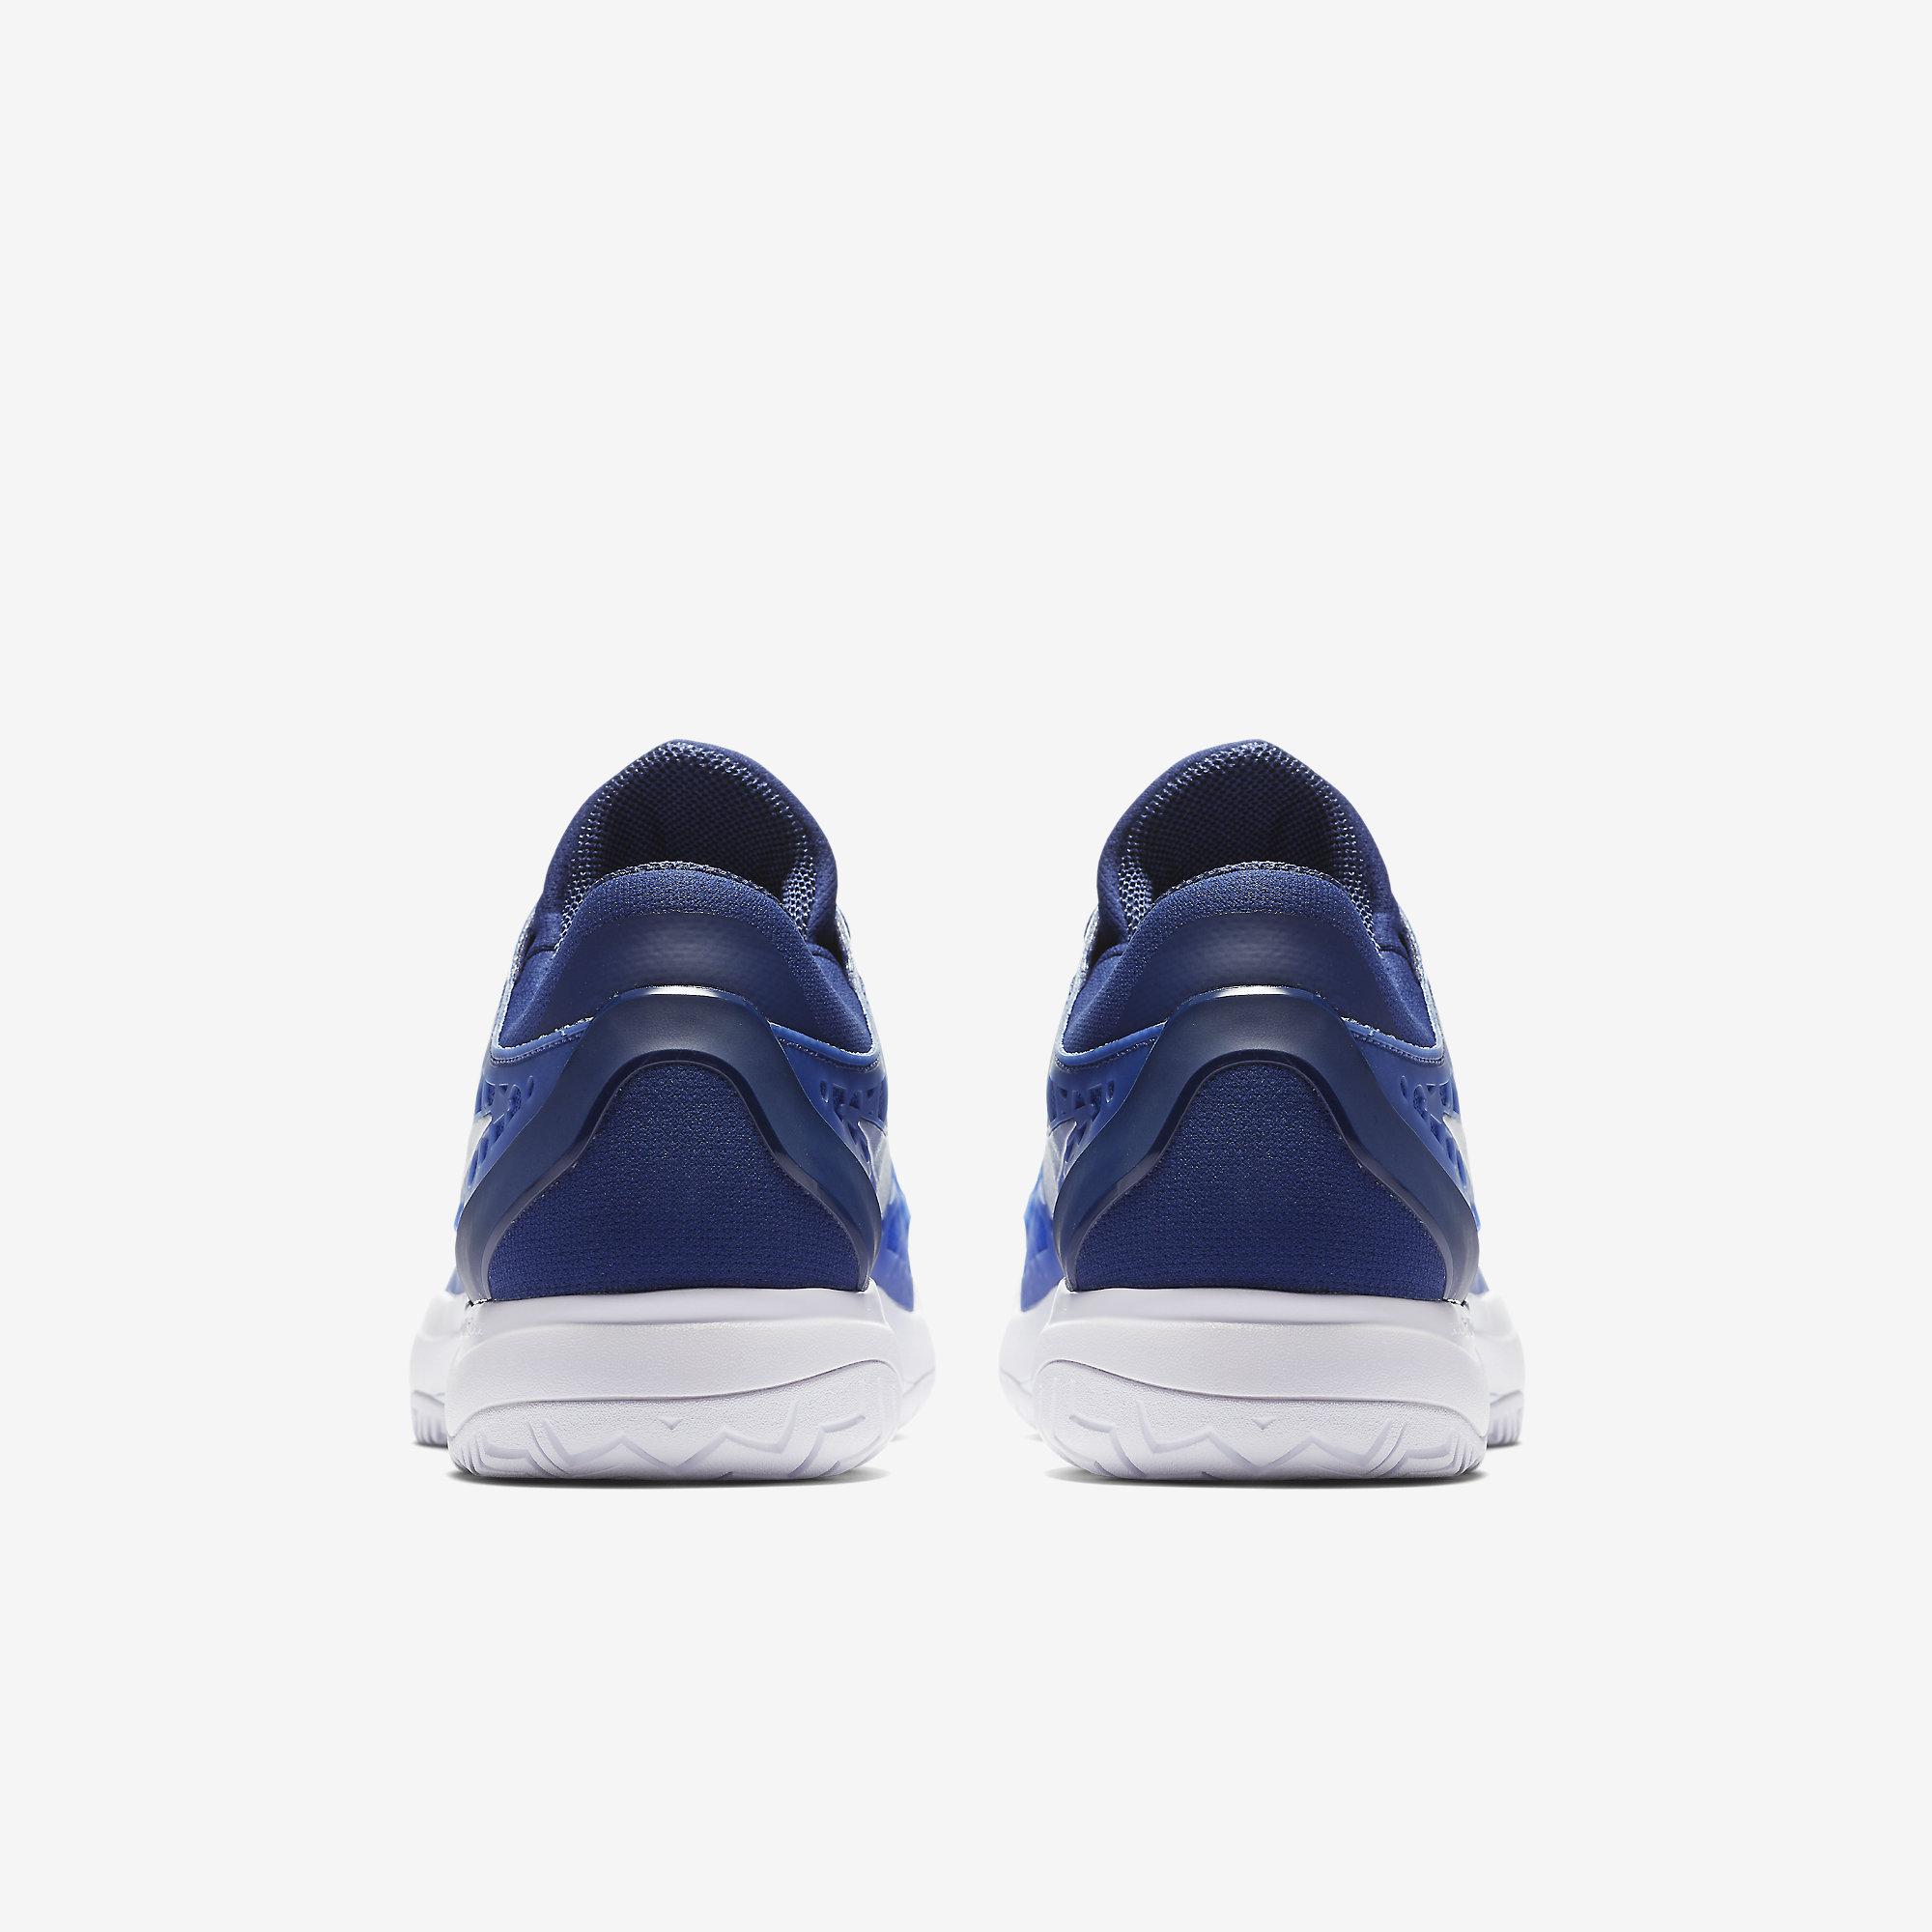 Nike Mens Zoom Cage 3 Tennis Shoes - Midnight Navy/Racer Blue ...